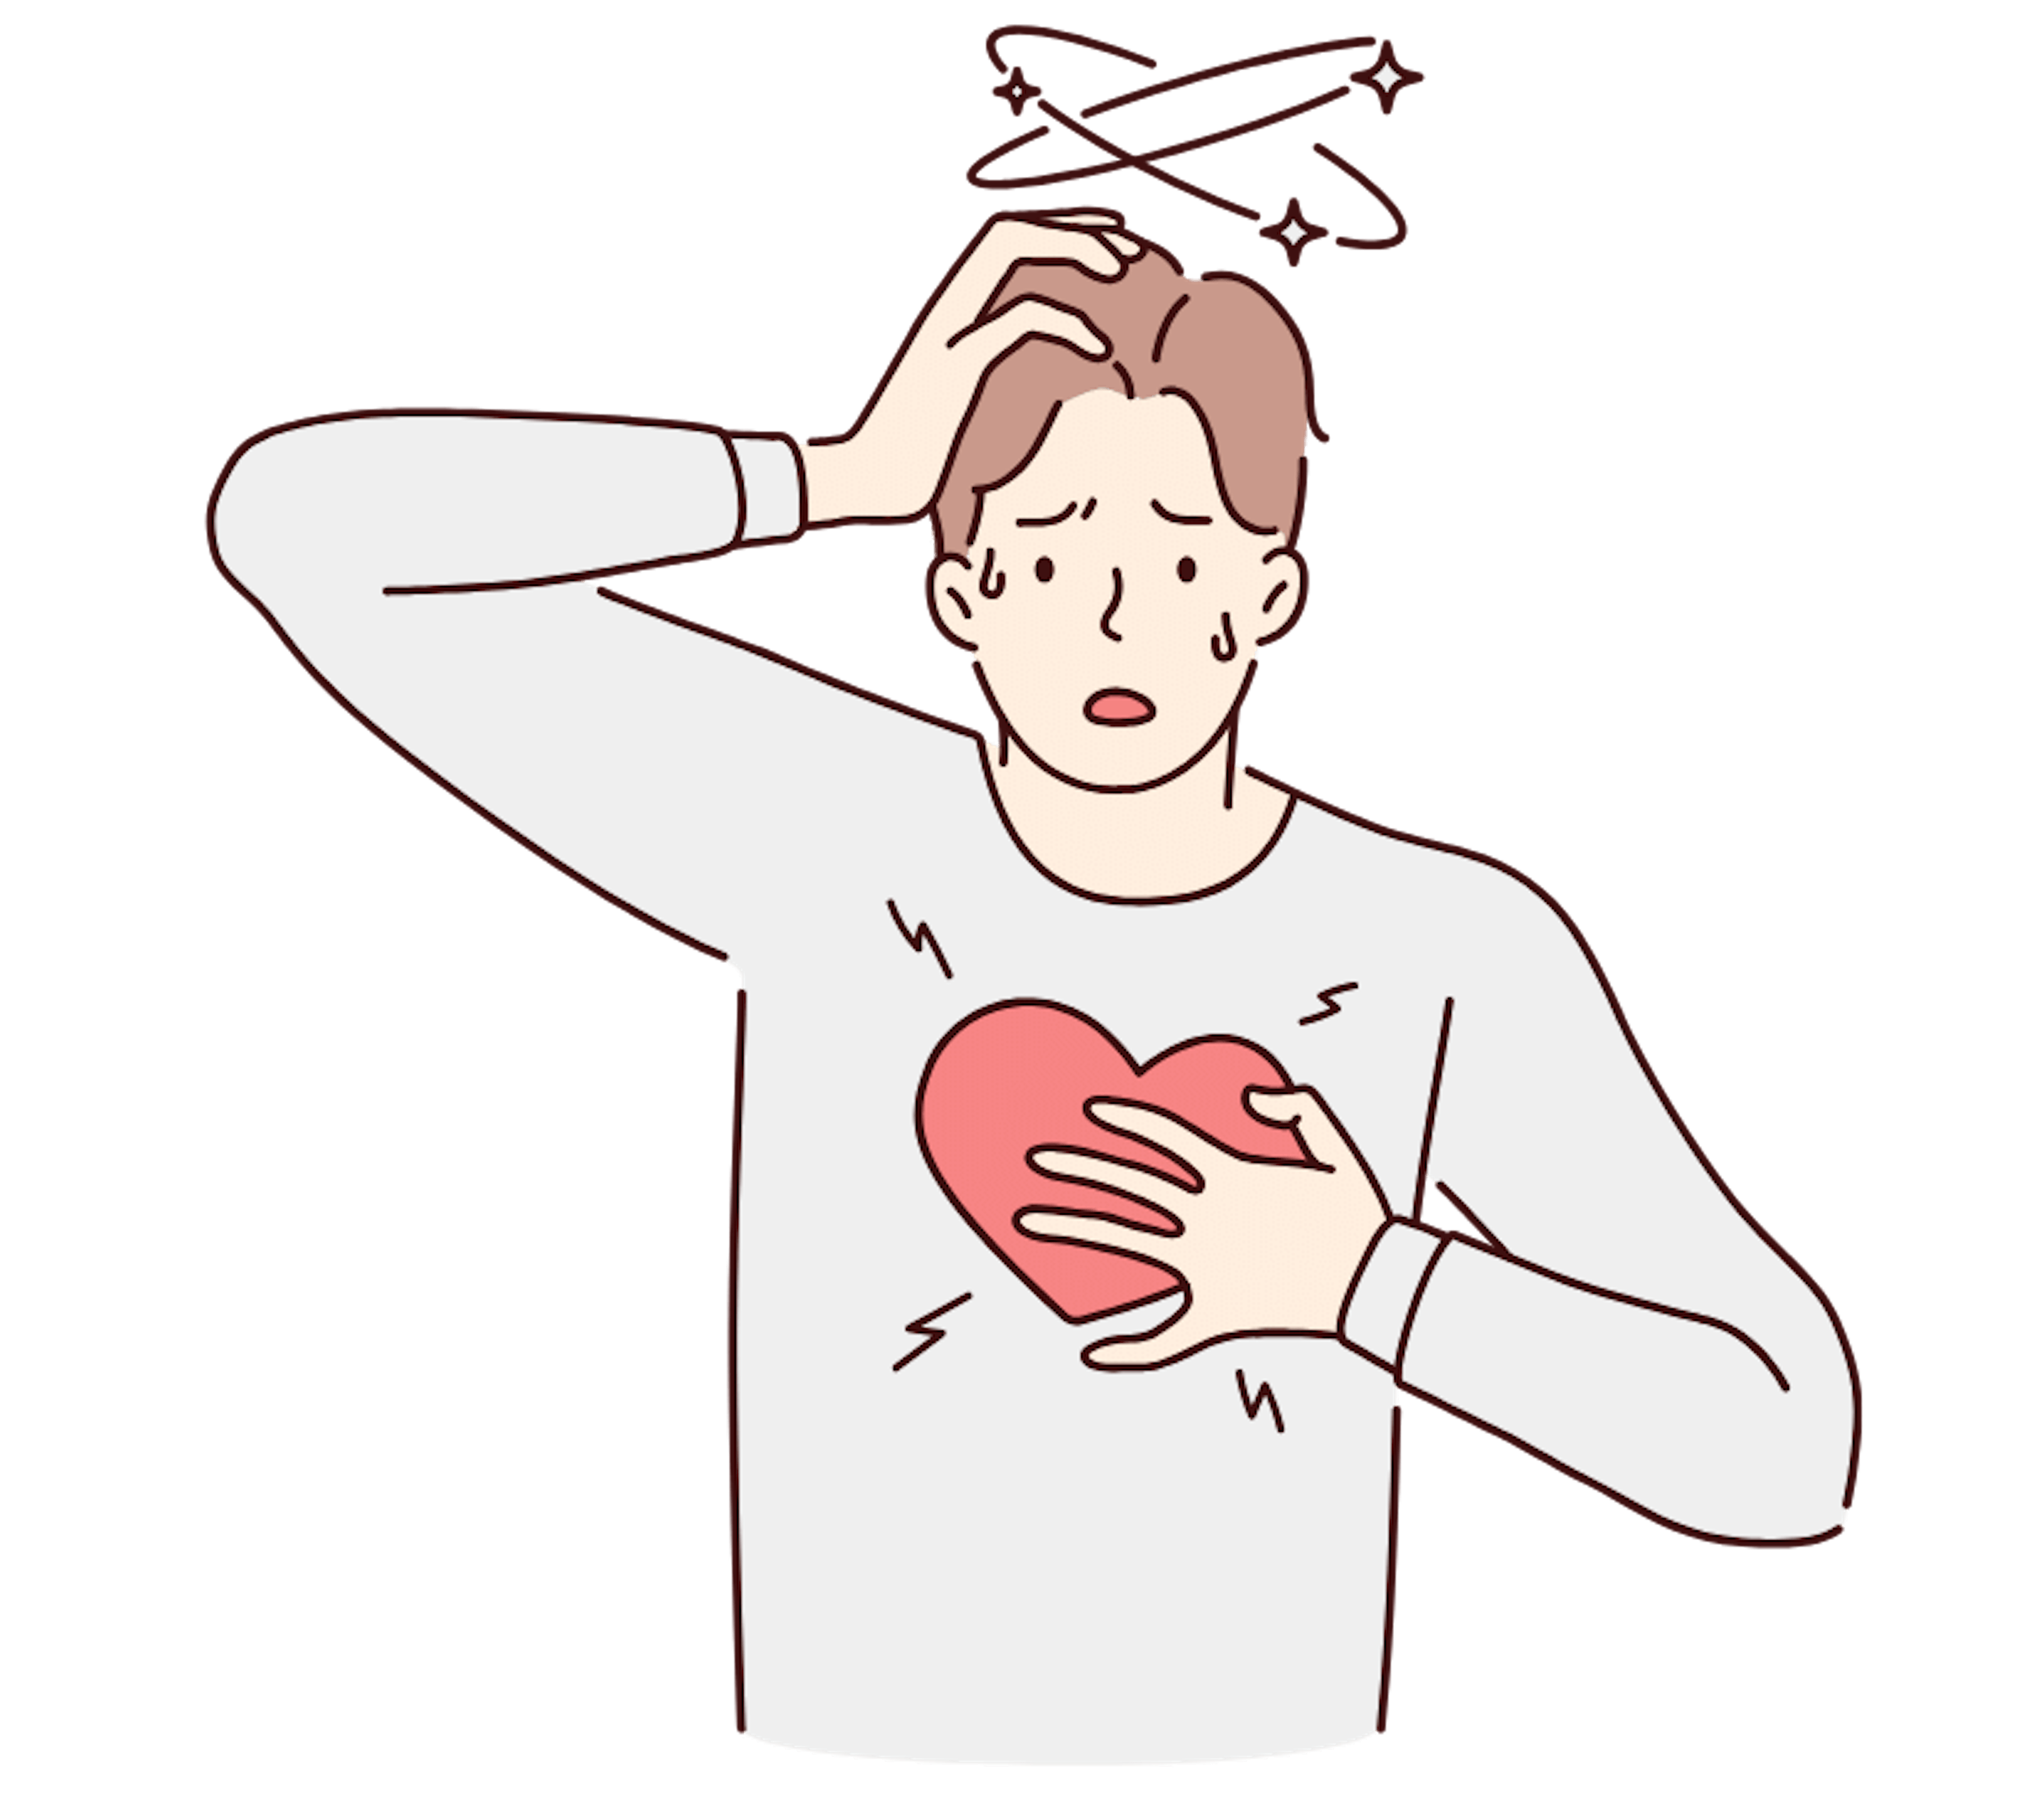 Panic attack symptons : heart attack and dizzy